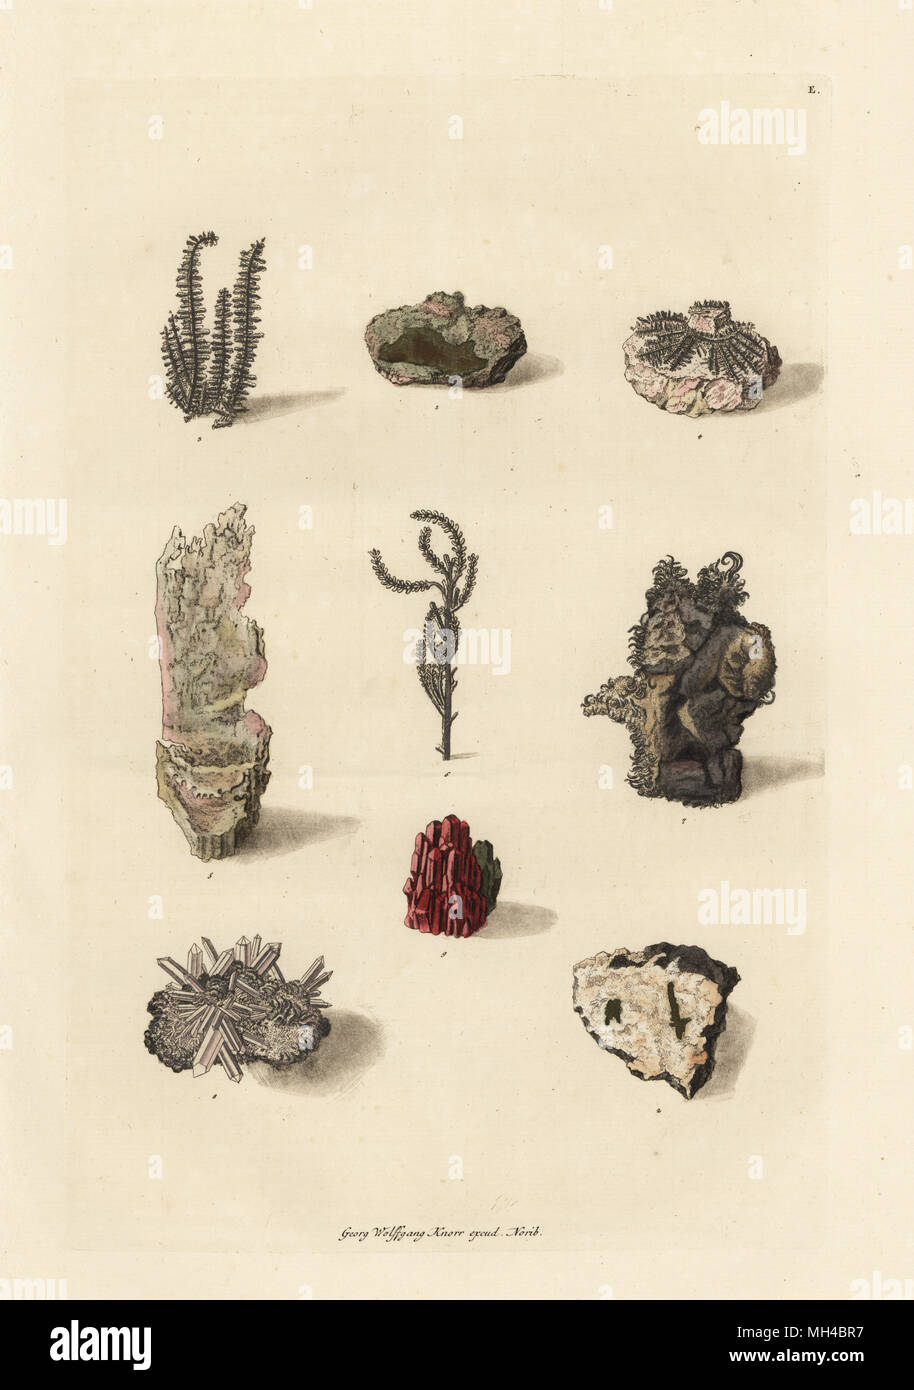 Varieties of gold and silver ores. Handcoloured copperplate drawn and engraved by Georg Wolfgang Knorr from his Deliciae Naturae Selectae of Kabinet van Zeldzaamheden der Natuur, Blusse and Son, Nuremberg, 1771. Stock Photo